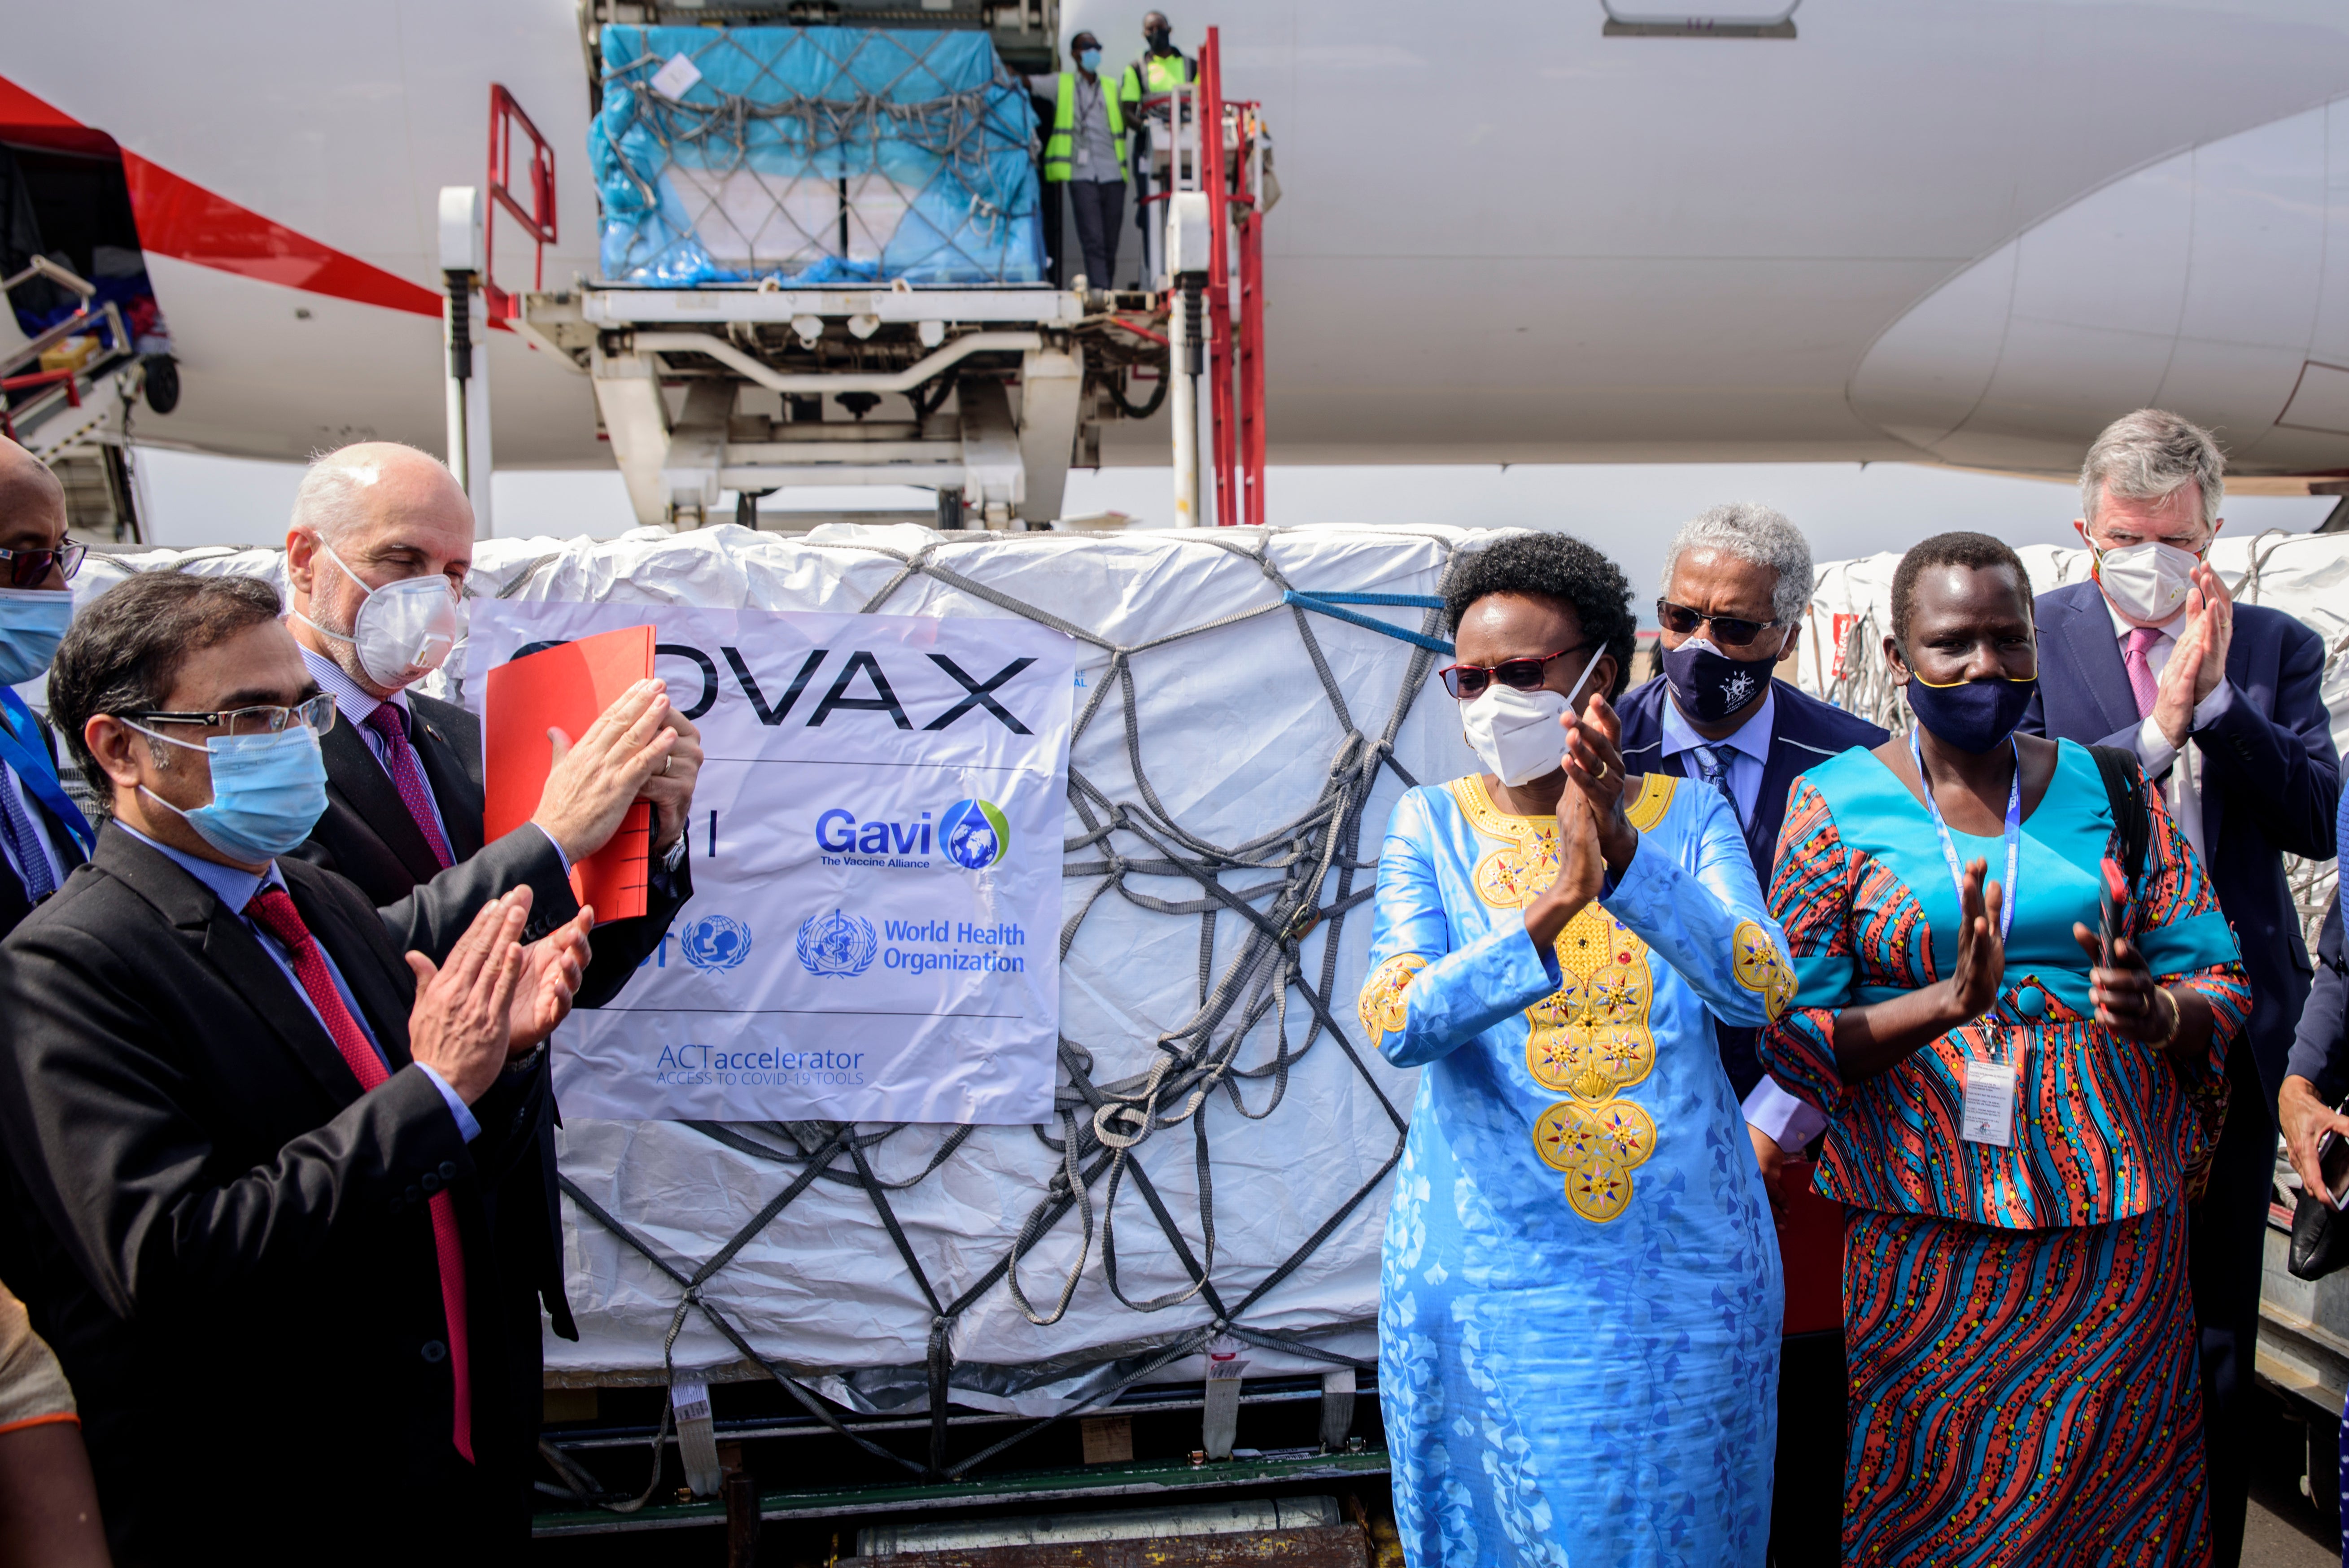 Uganda received first consignment of AstraZeneca COVID-19 vaccine manufactured by the Serum Institute of India on 5 March. Pakistan will receive the same vaccine under Covax initiative